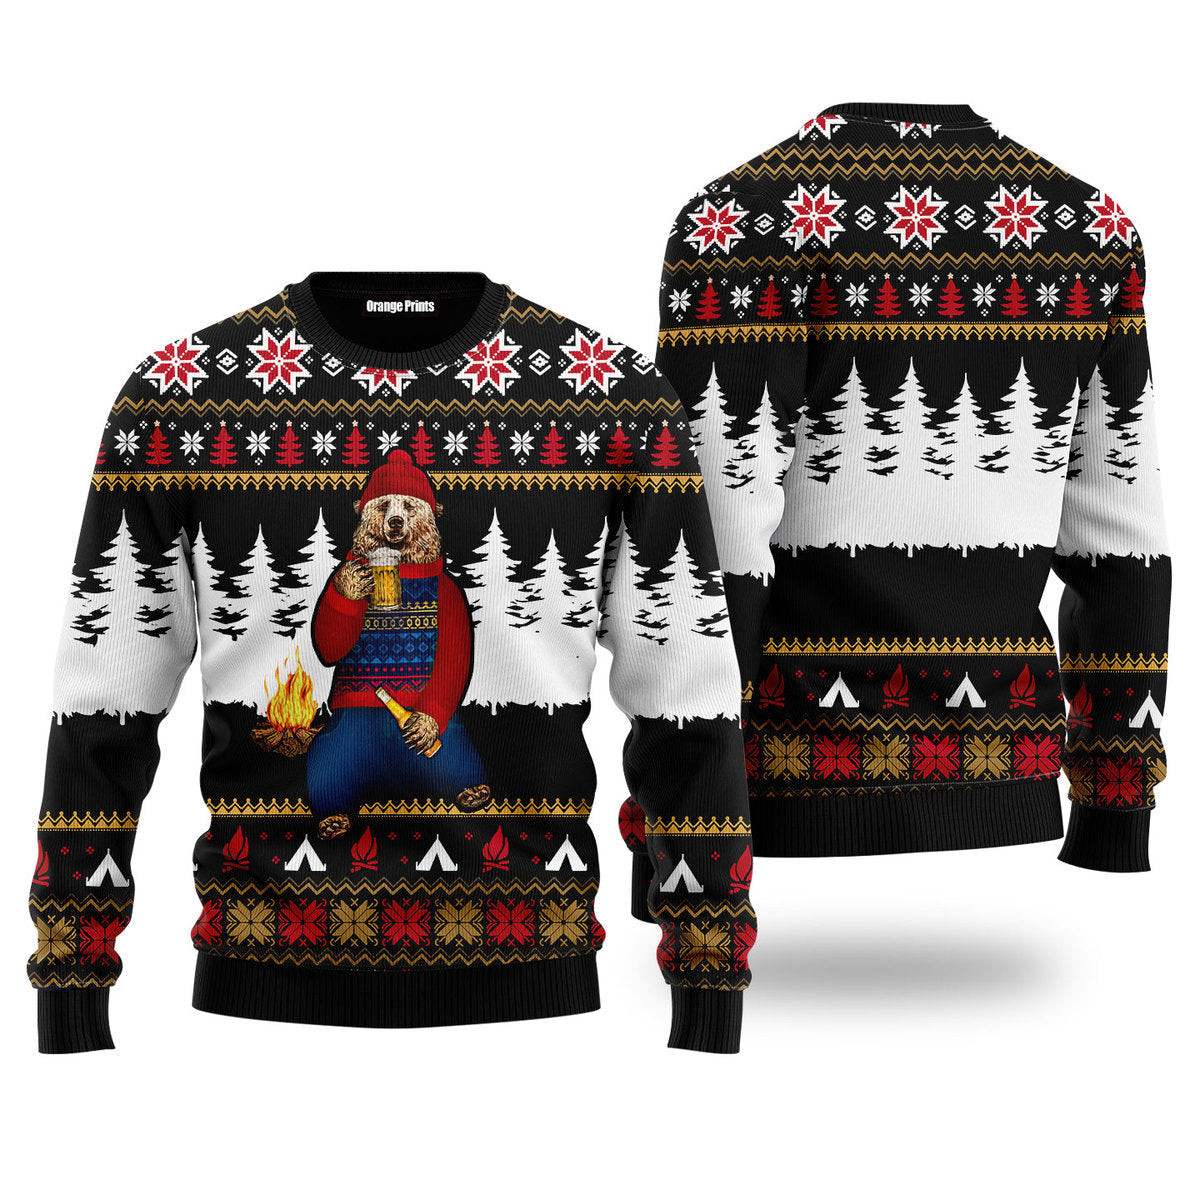 Bear Campfire Ugly Christmas Sweater Ugly Sweater For Men Women